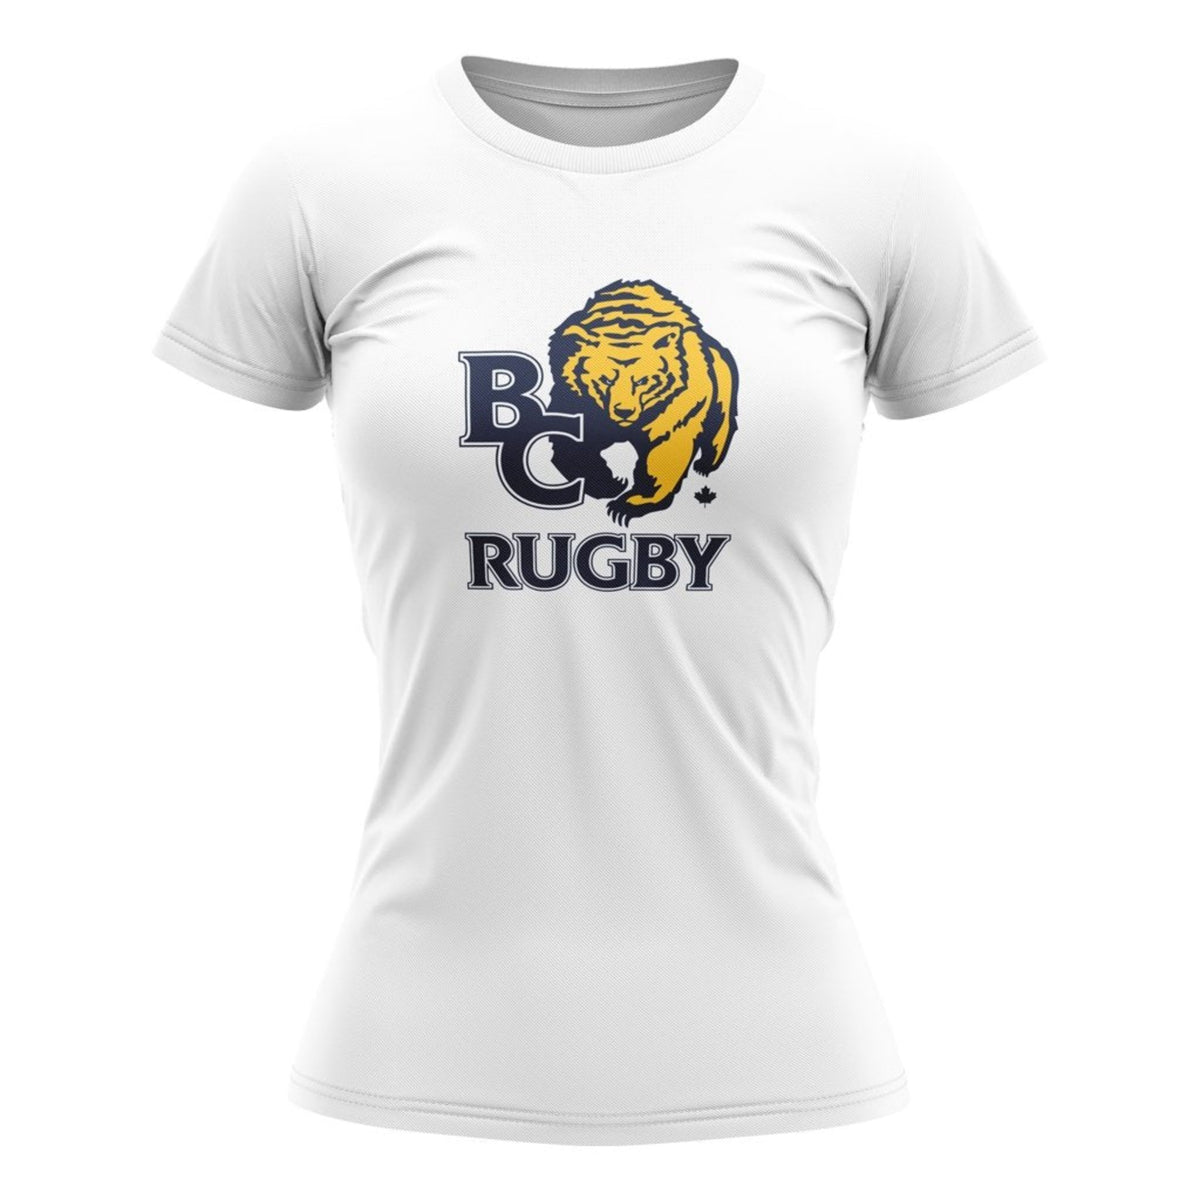 BC Rugby 2021 &quot;Team&quot; Tee - Women&#39;s Navy/Grey/White/Gold - www.therugbyshop.com www.therugbyshop.com WOMENS / WHITE / XS XIX Brands TEES BC Rugby 2021 &quot;Team&quot; Tee - Women&#39;s Navy/Grey/White/Gold